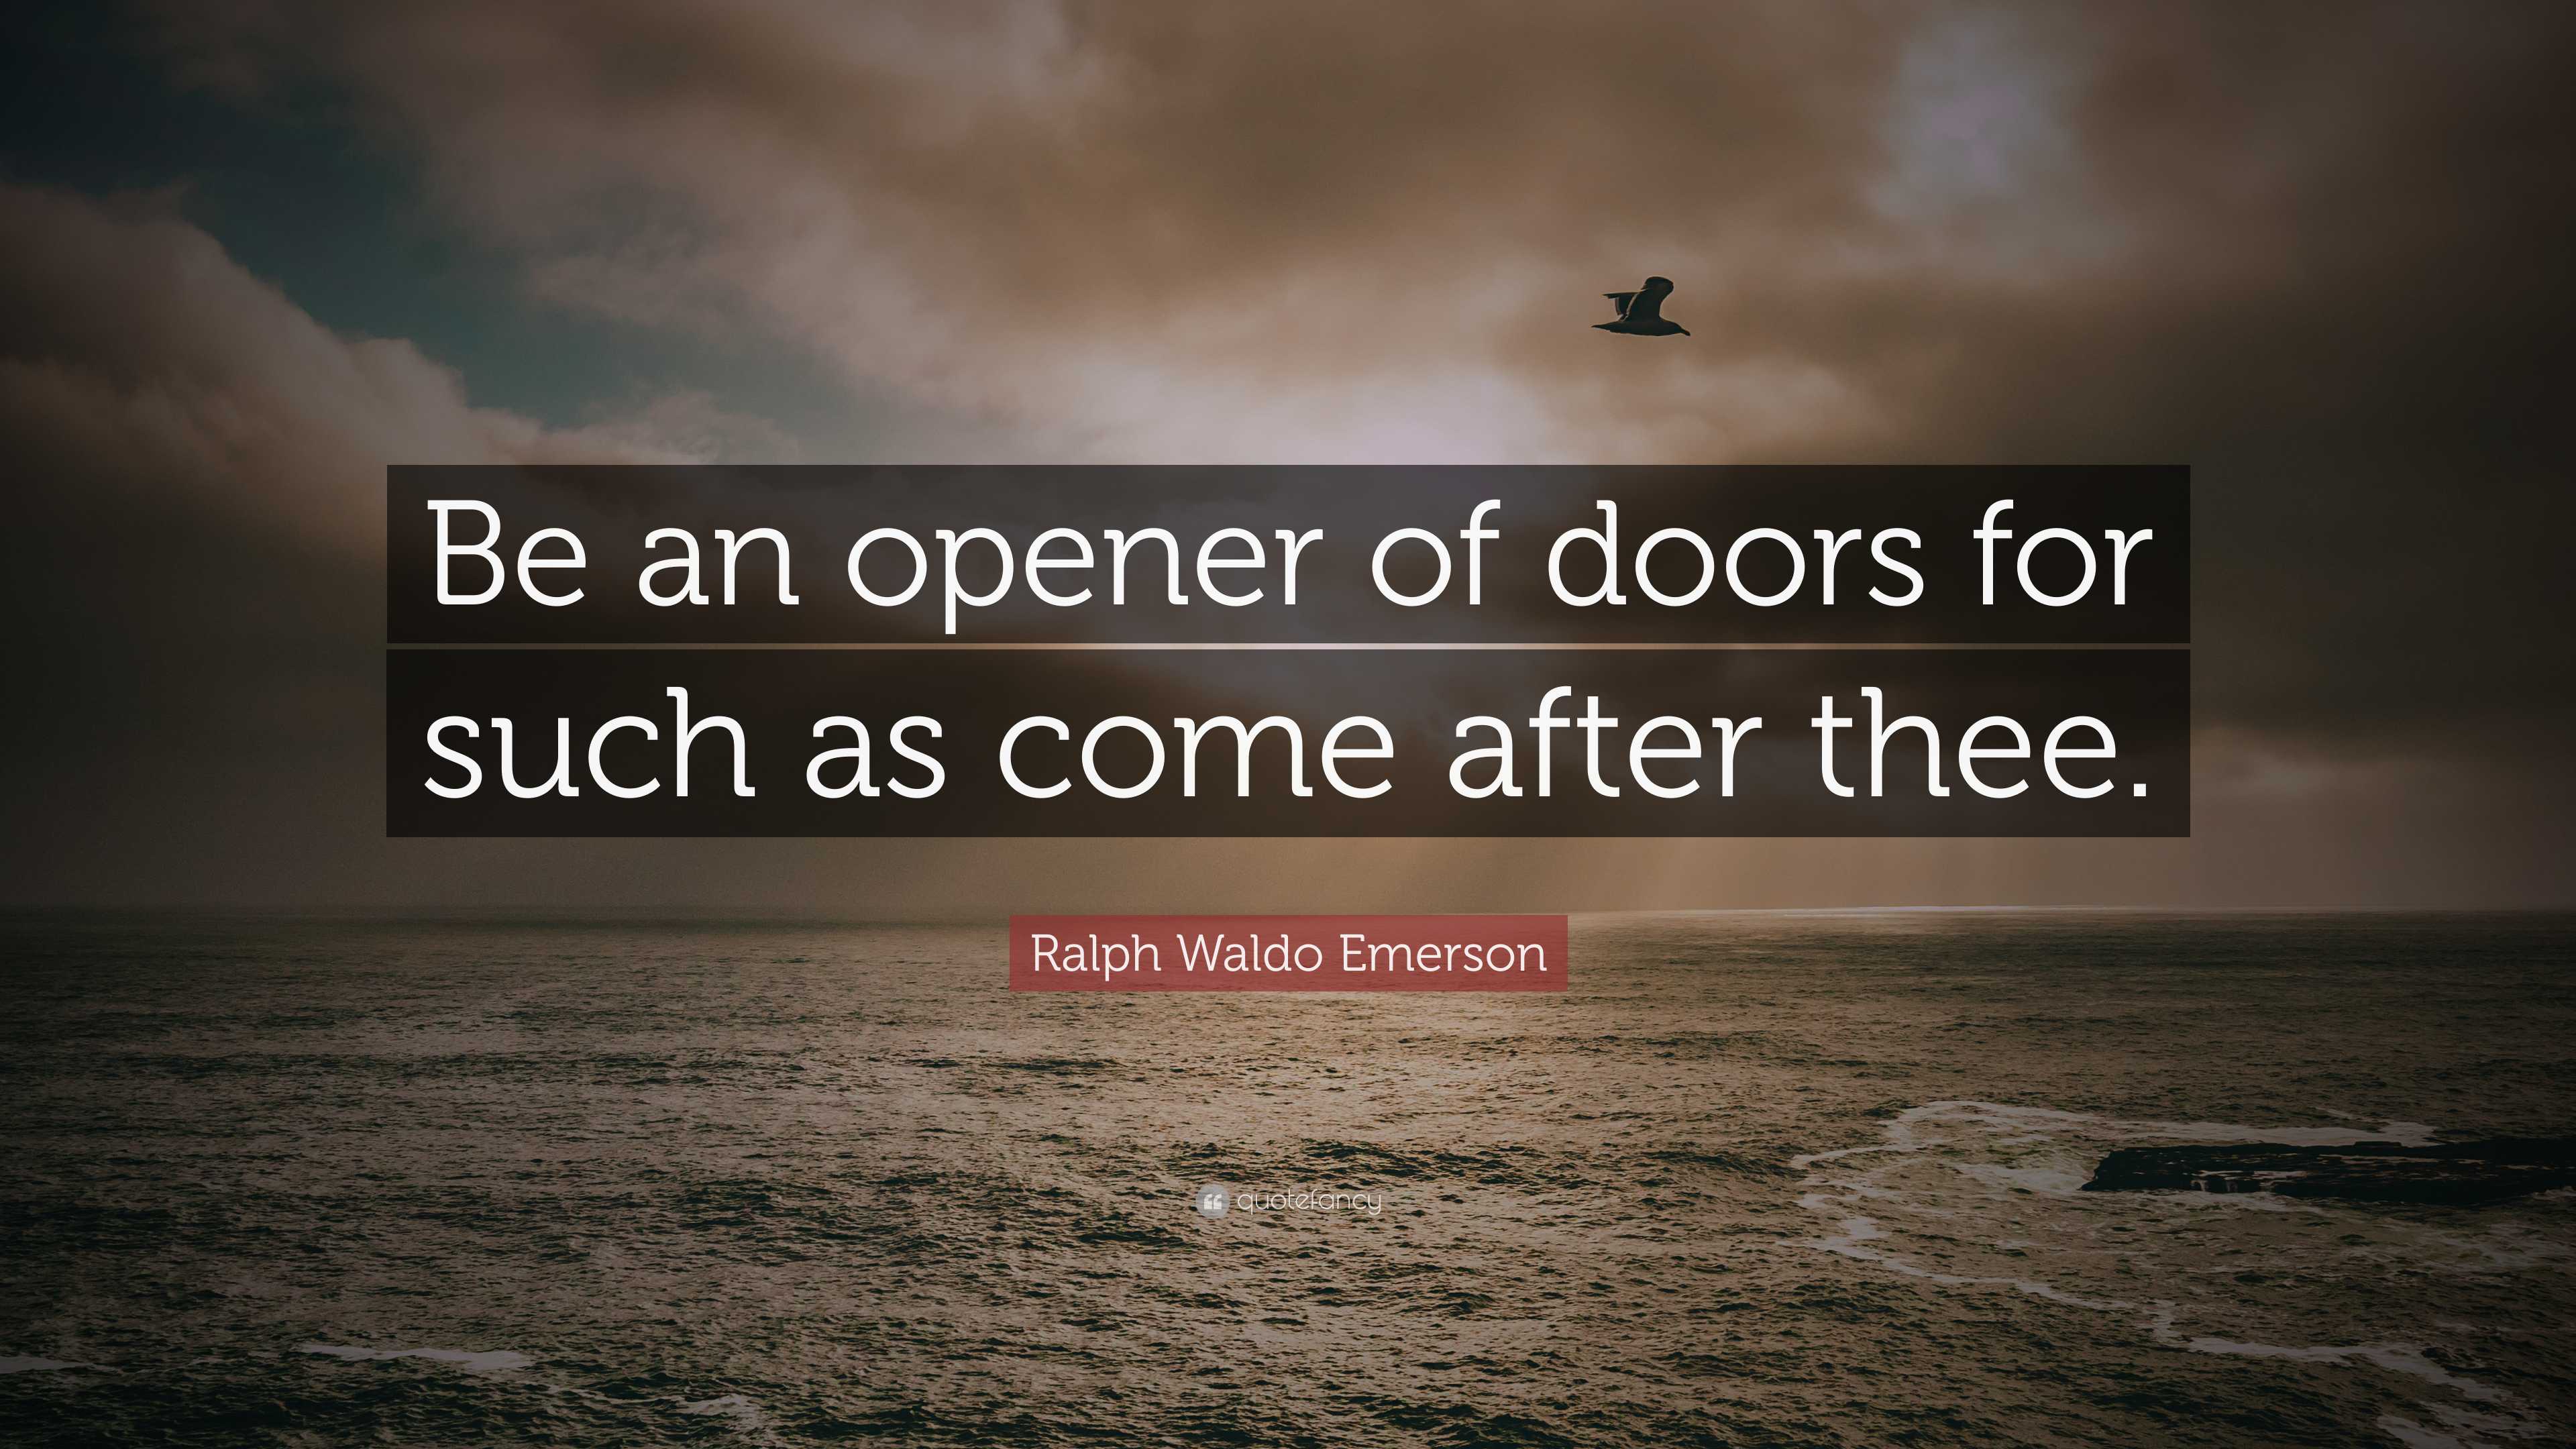 https://quotefancy.com/media/wallpaper/3840x2160/7939921-Ralph-Waldo-Emerson-Quote-Be-an-opener-of-doors-for-such-as-come.jpg